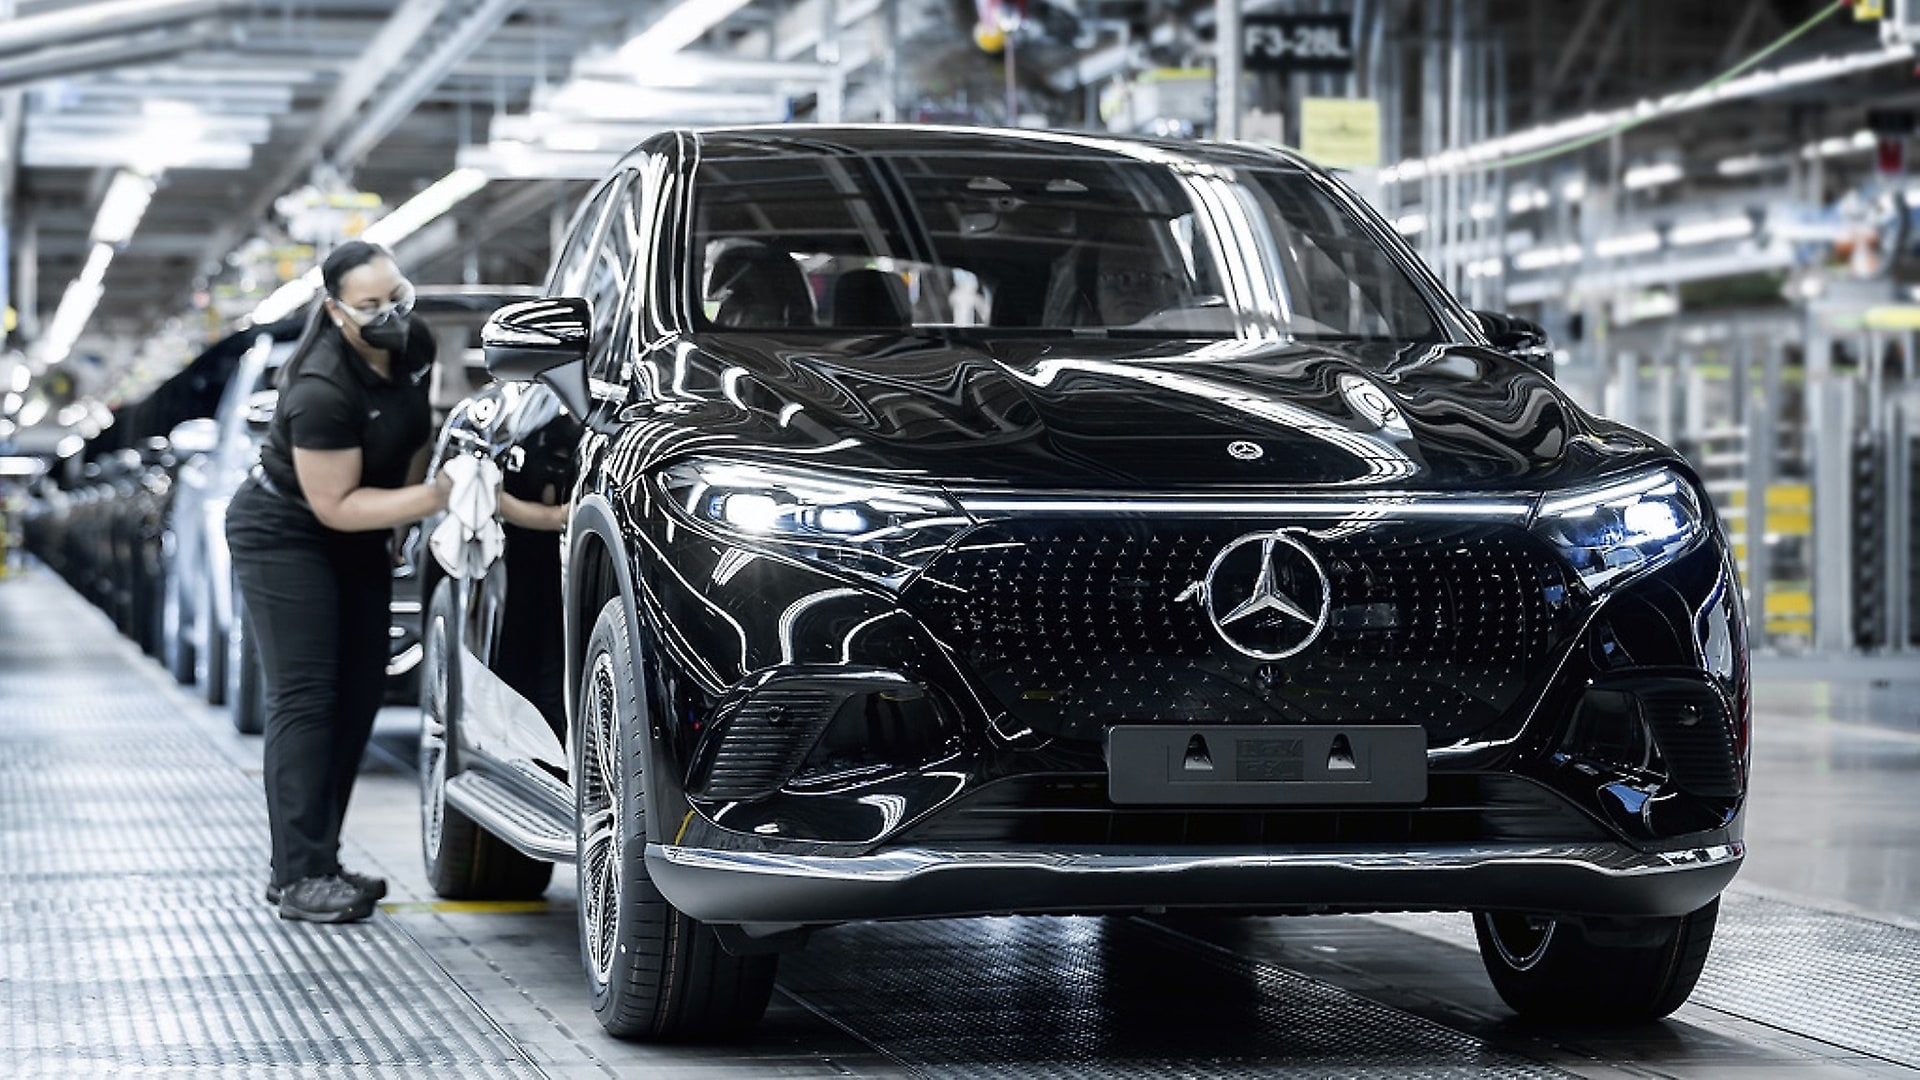 A glimpse into production at the Mercedes-Benz plant Tuscaloosa.